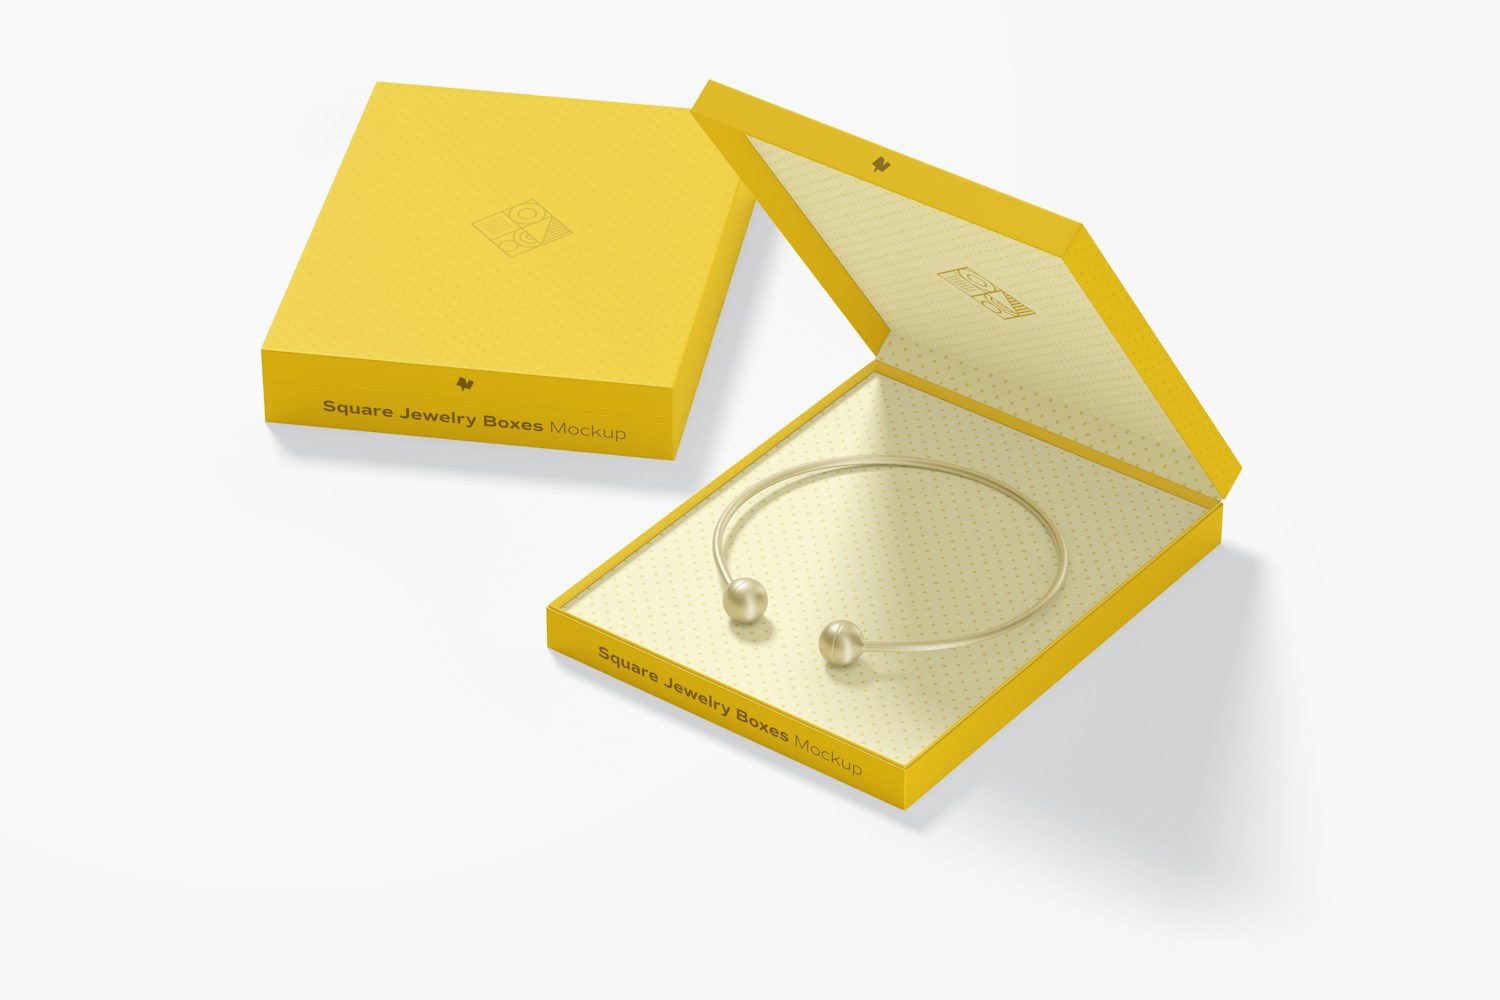 Square Jewelry Boxes Mockup, Opened and Closed